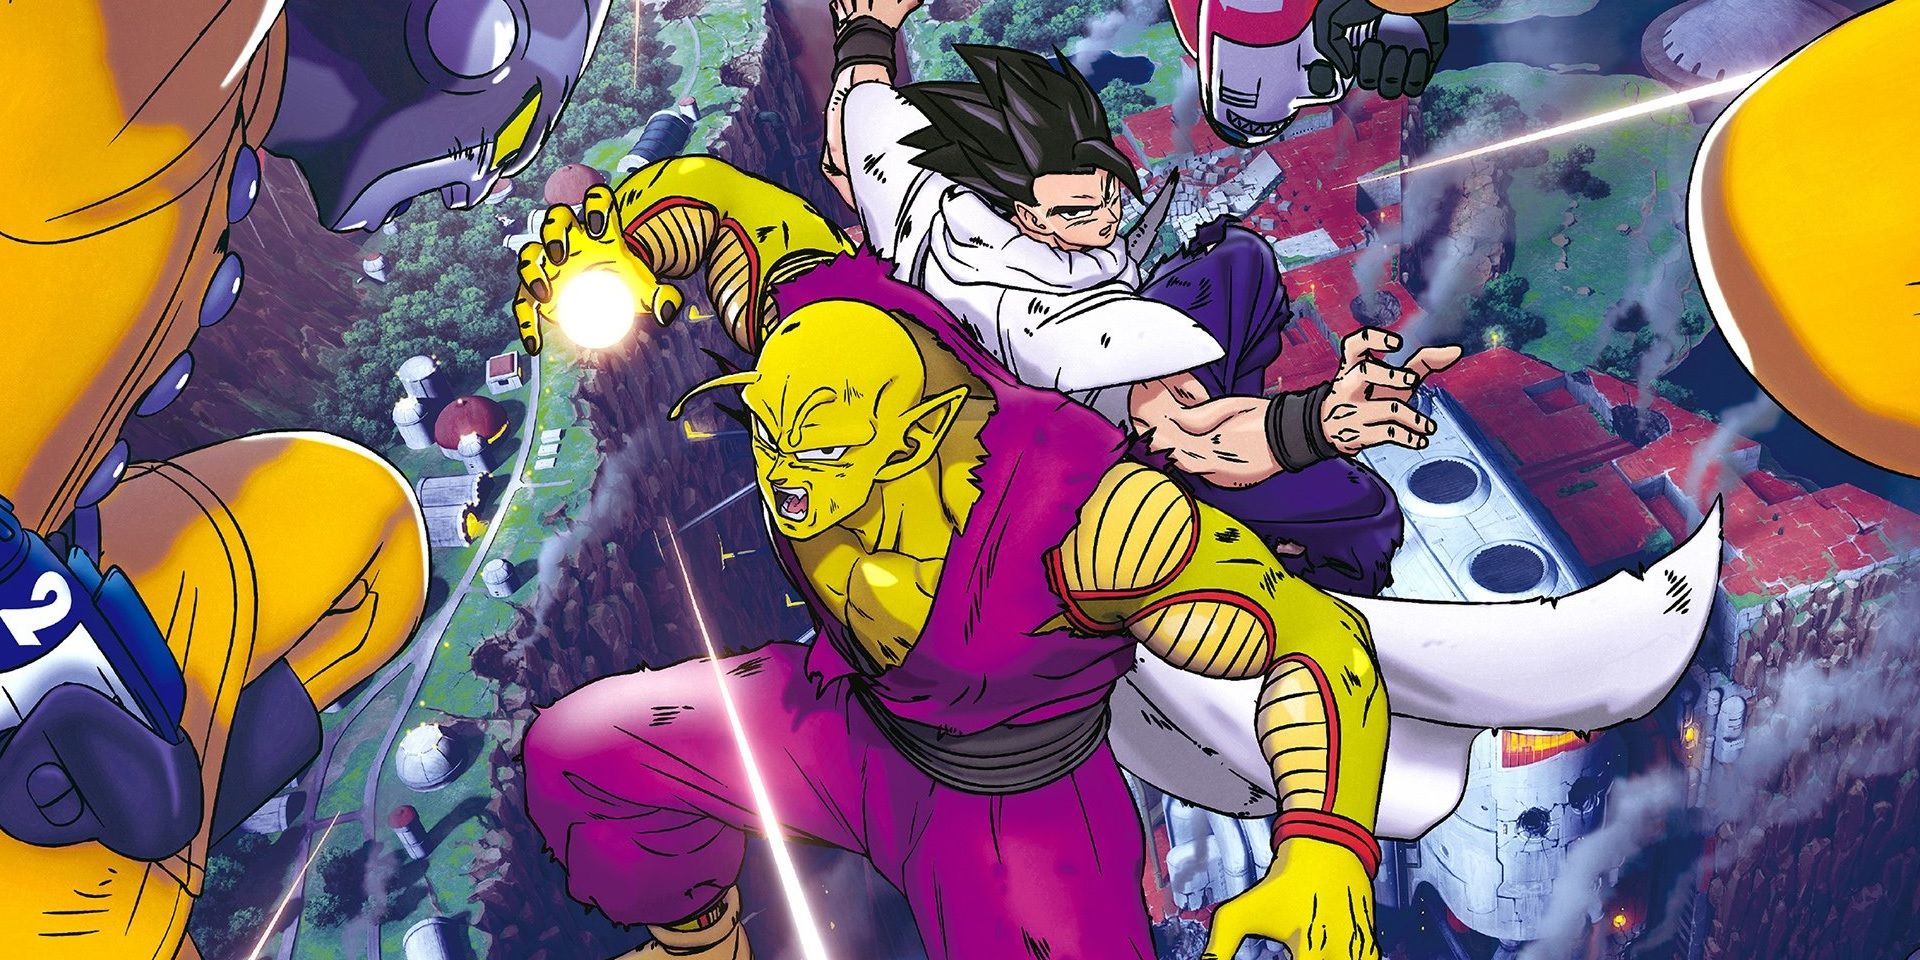 Gohan and Piccolo, in their Ultimate forms, face off against the Gamma Androids in Dragon Ball Super: Super Hero.